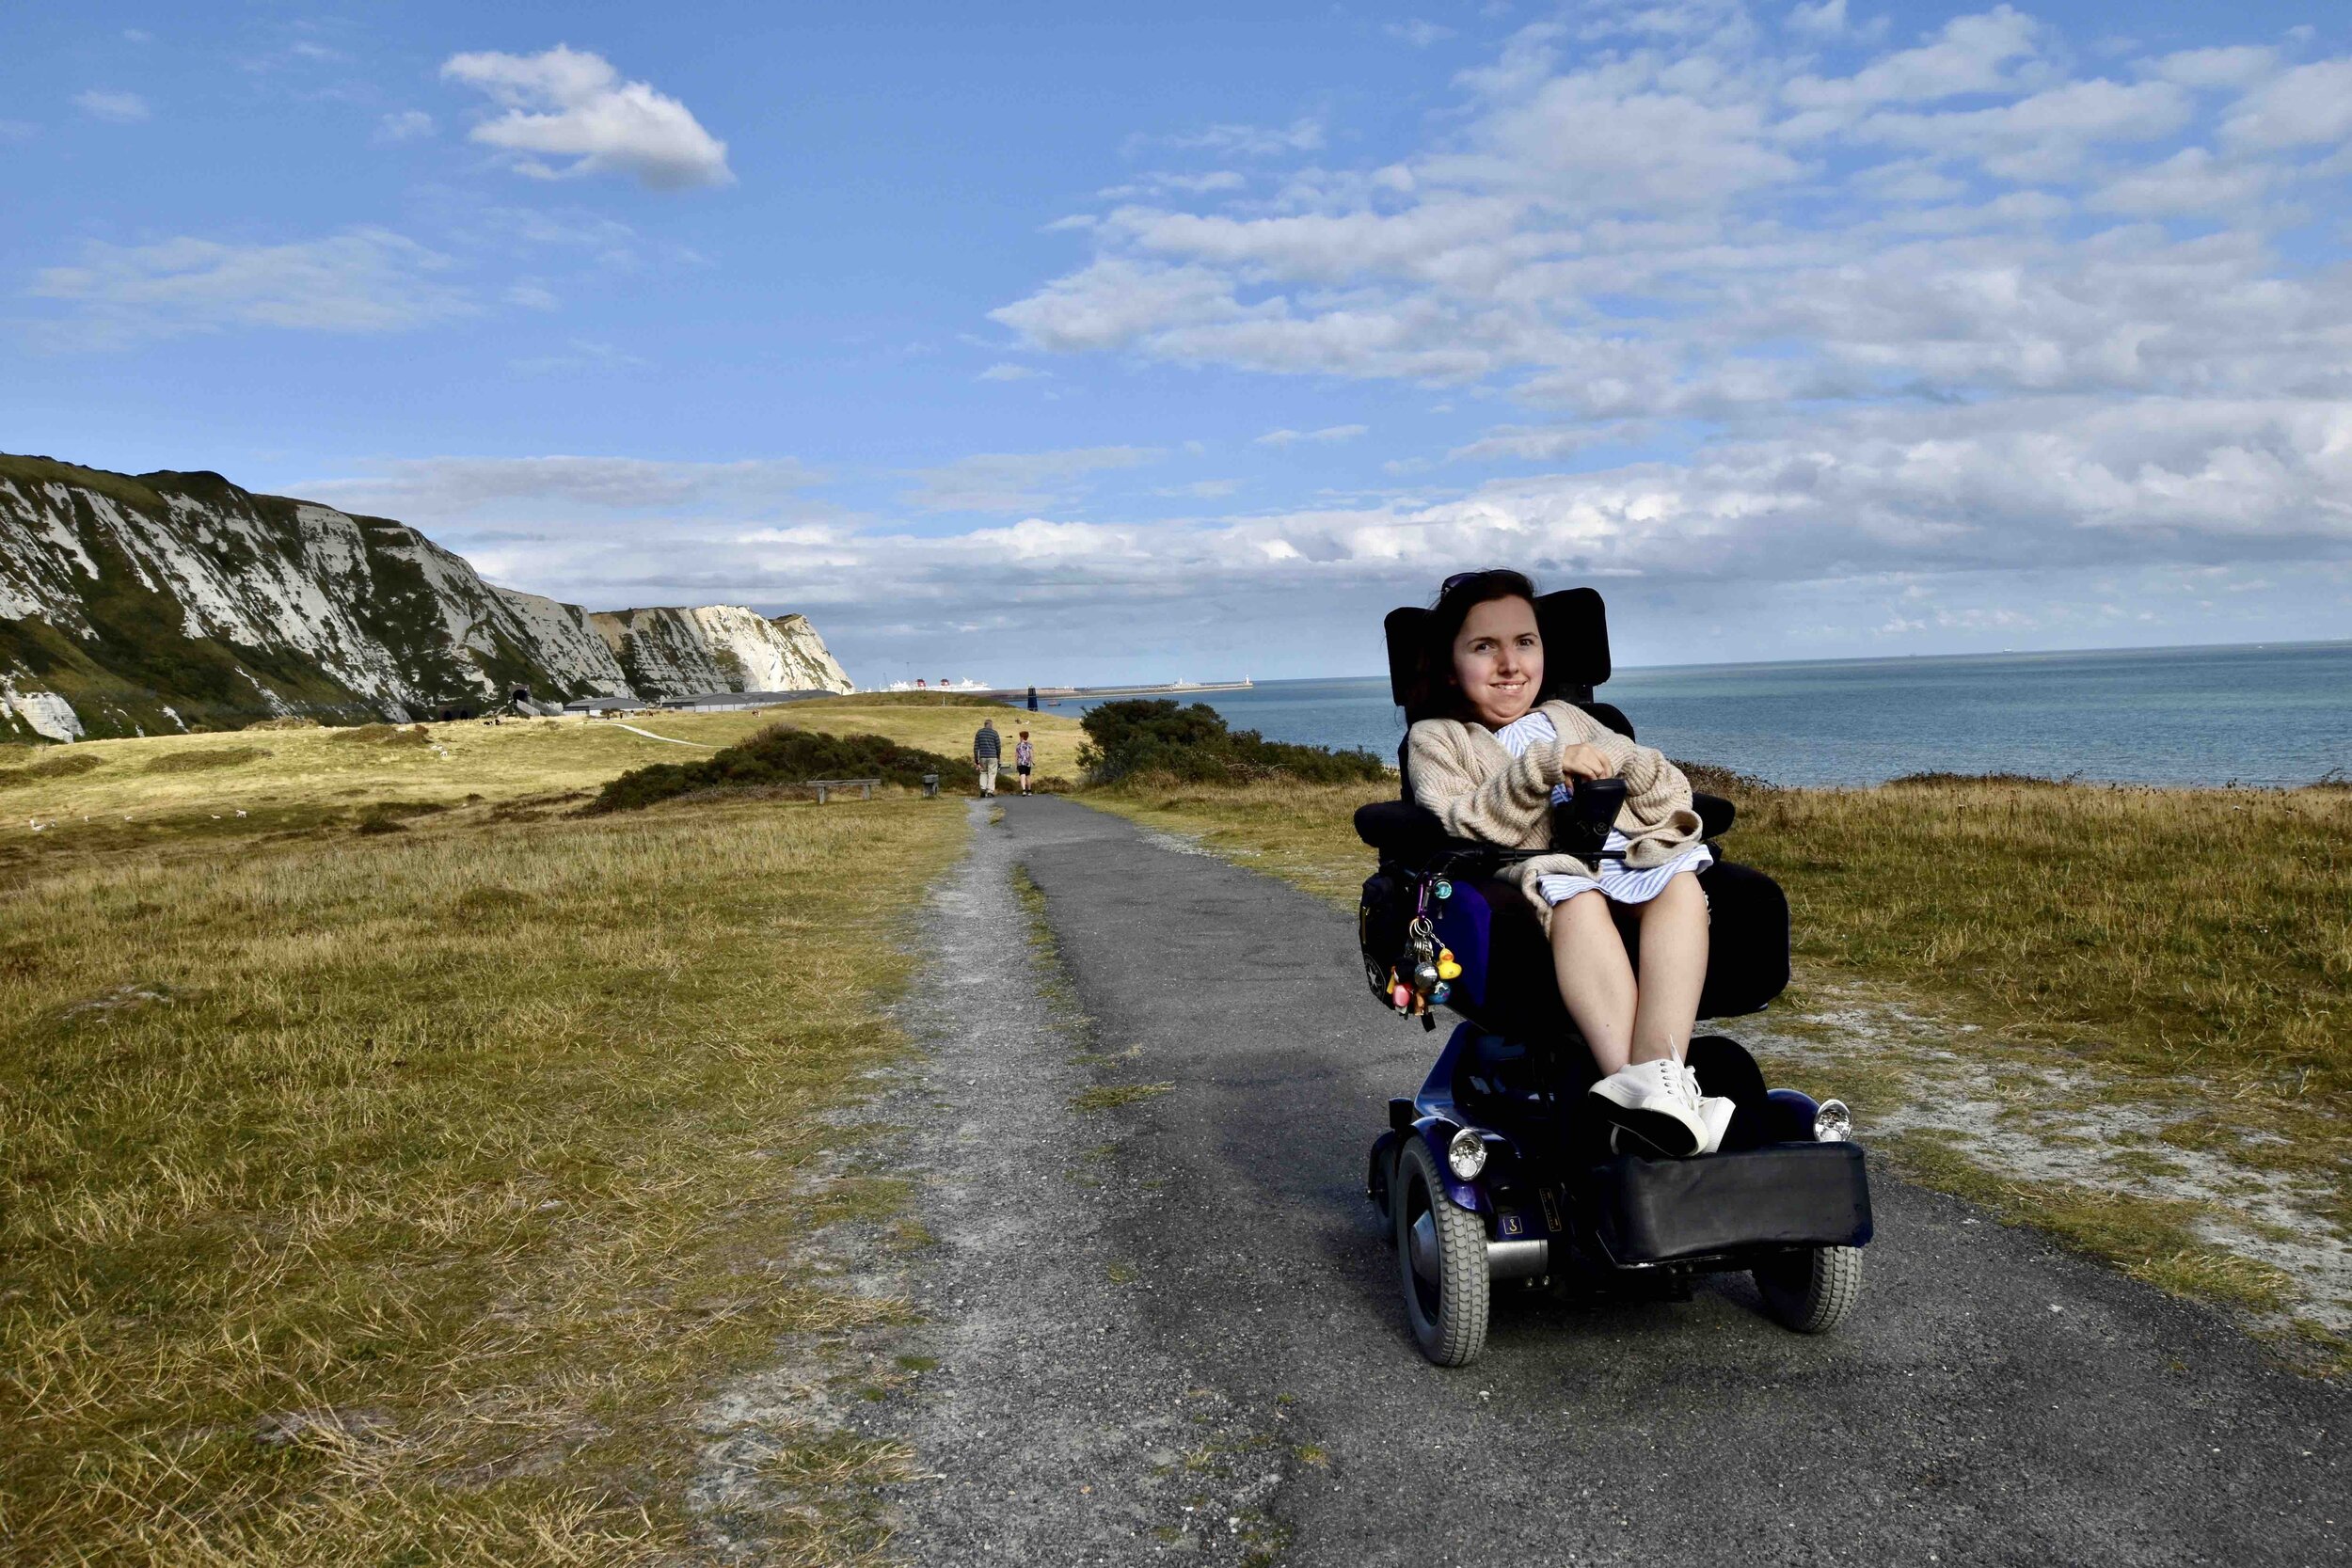 Karla, a wheelchair user, at Samphire Hoe Nature Reserve.